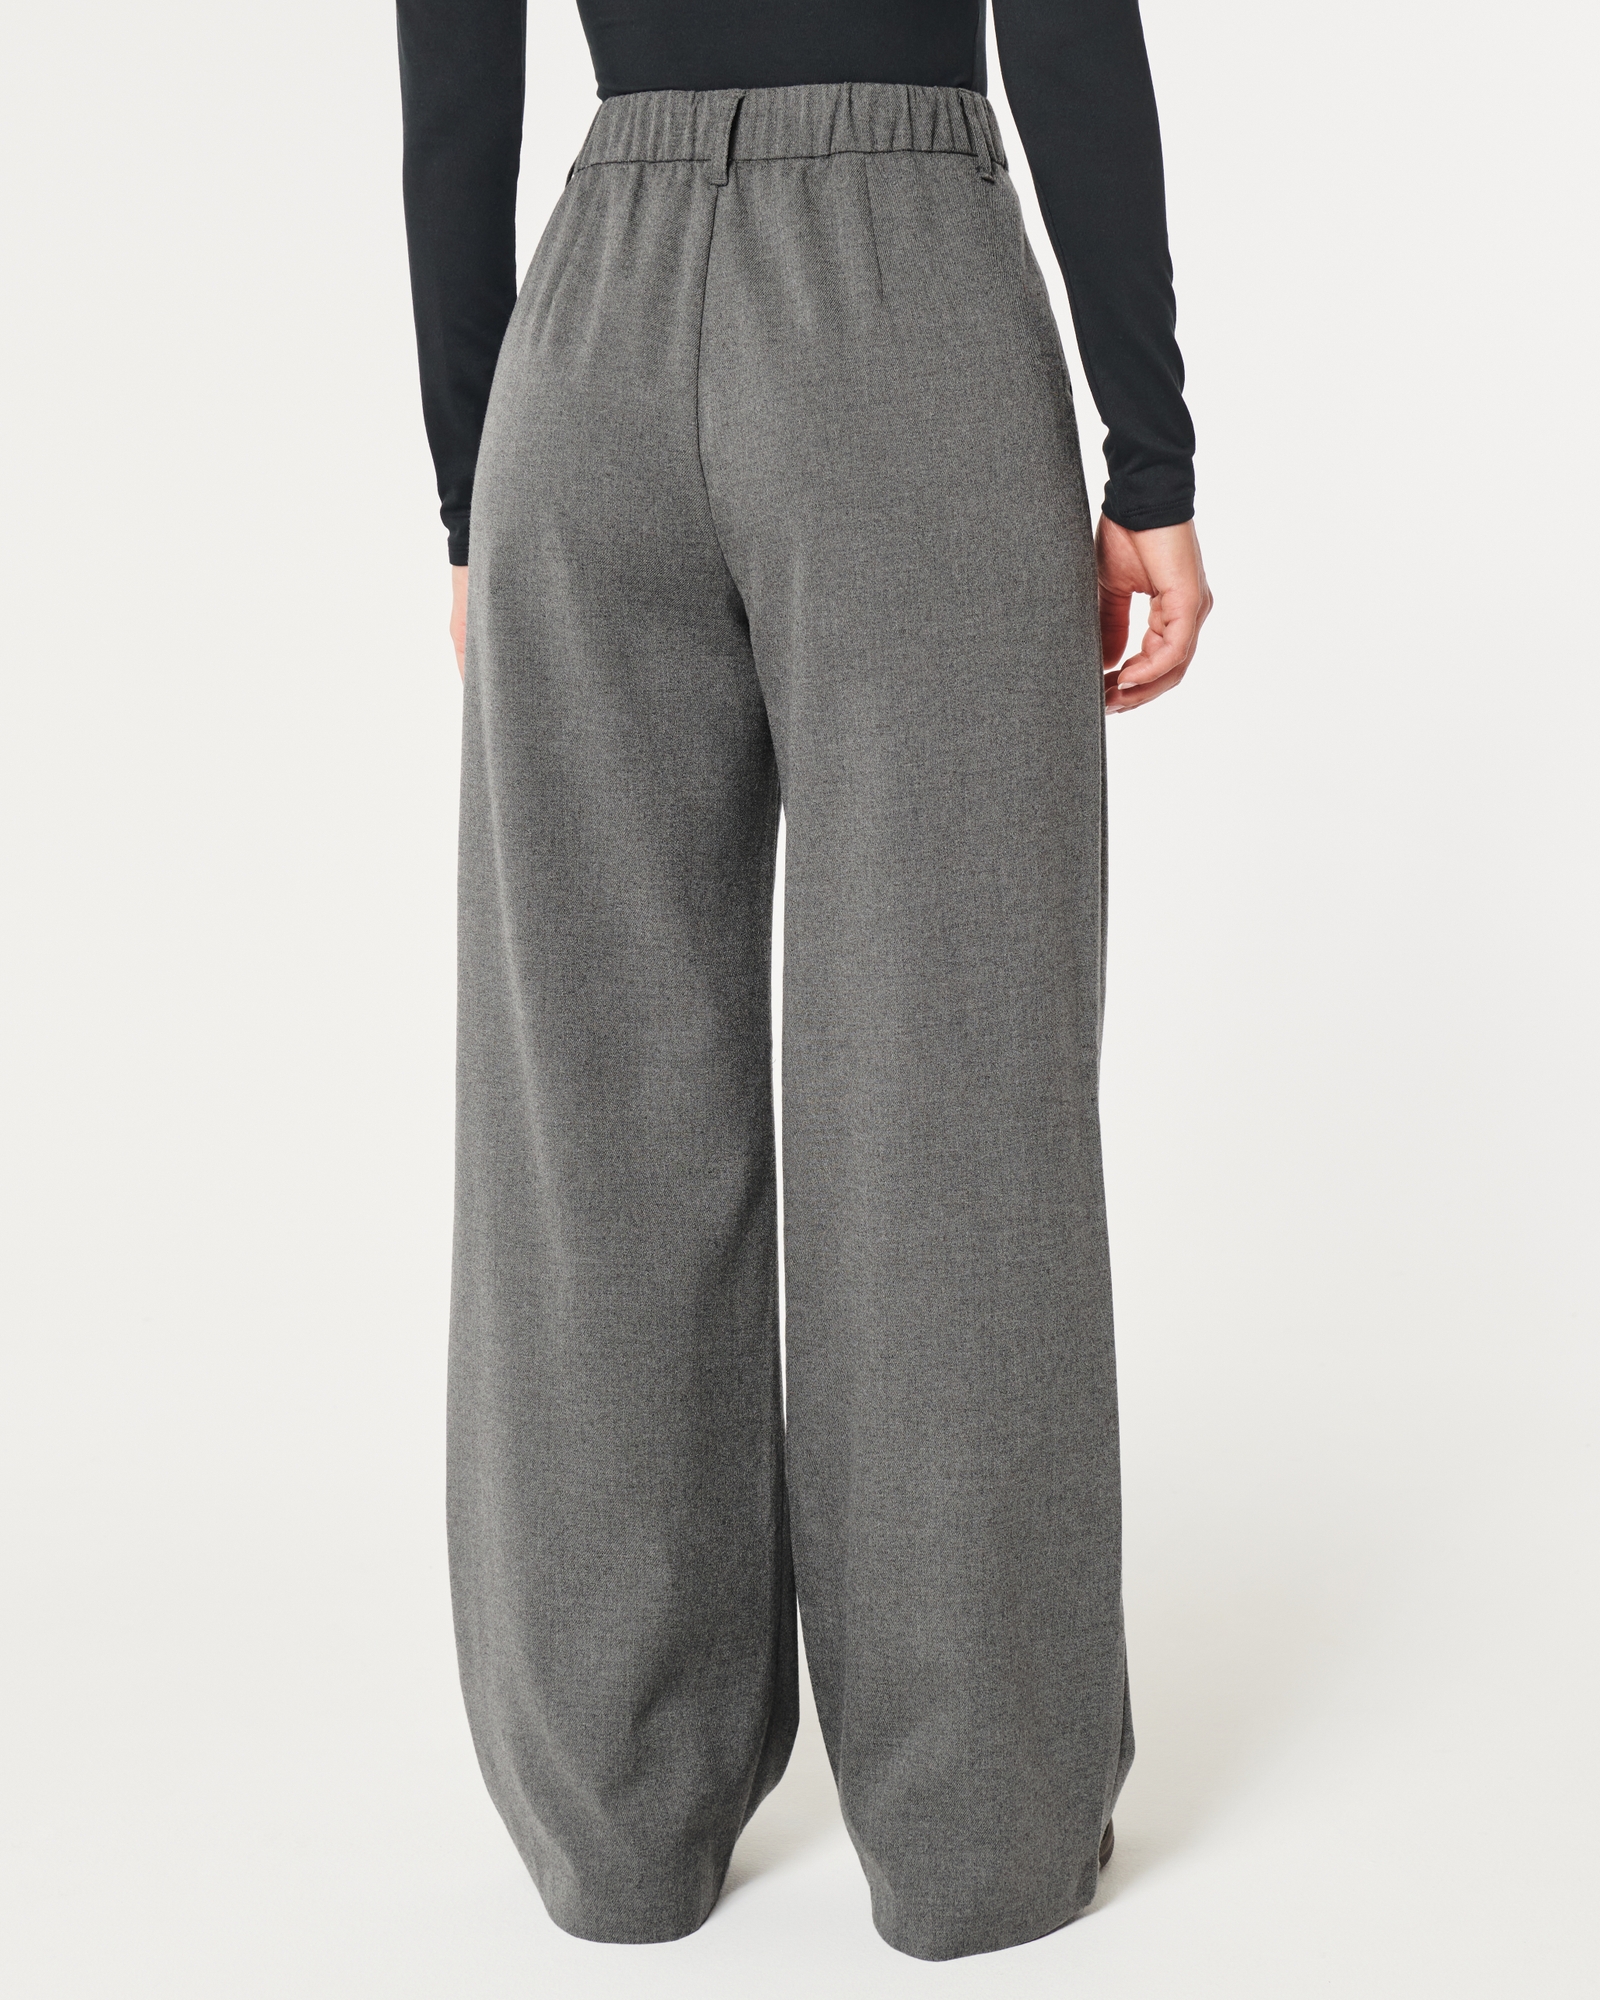 Hollister Ultra High Rise Plaid Pants Gray Size XS - $22 (51% Off Retail) -  From Aikaterina